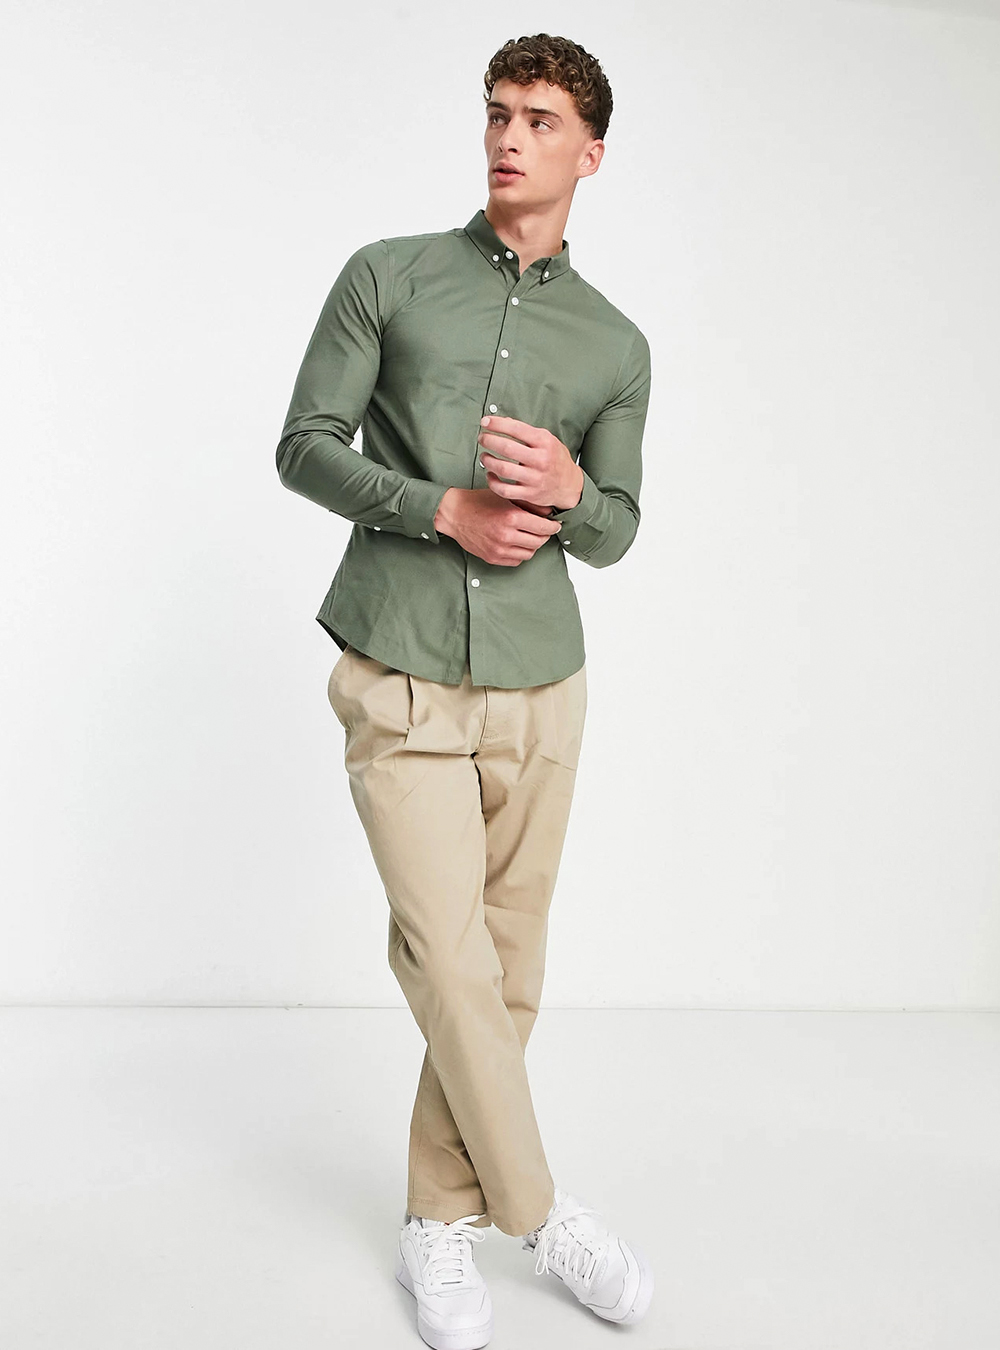 olive green button-down shirt, khaki pants, and white sneakers